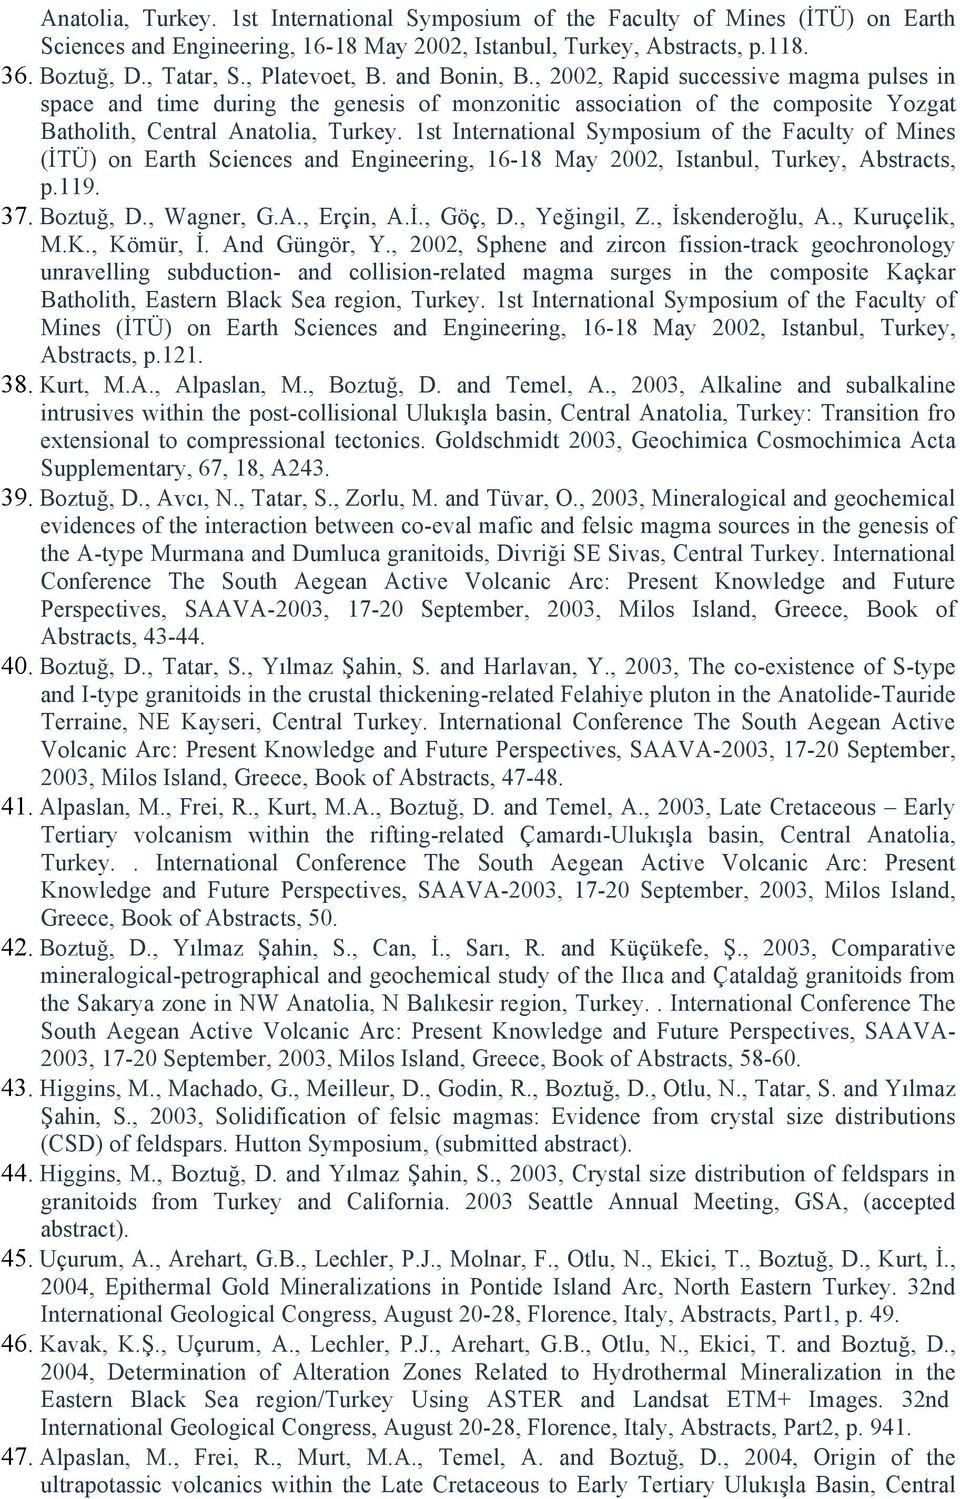 1st International Symposium of the Faculty of Mines (İTÜ) on Earth Sciences and Engineering, 16-18 May 2002, Istanbul, Turkey, Abstracts, p.119. 37. Boztuğ, D., Wagner, G.A., Erçin, A.İ., Göç, D.